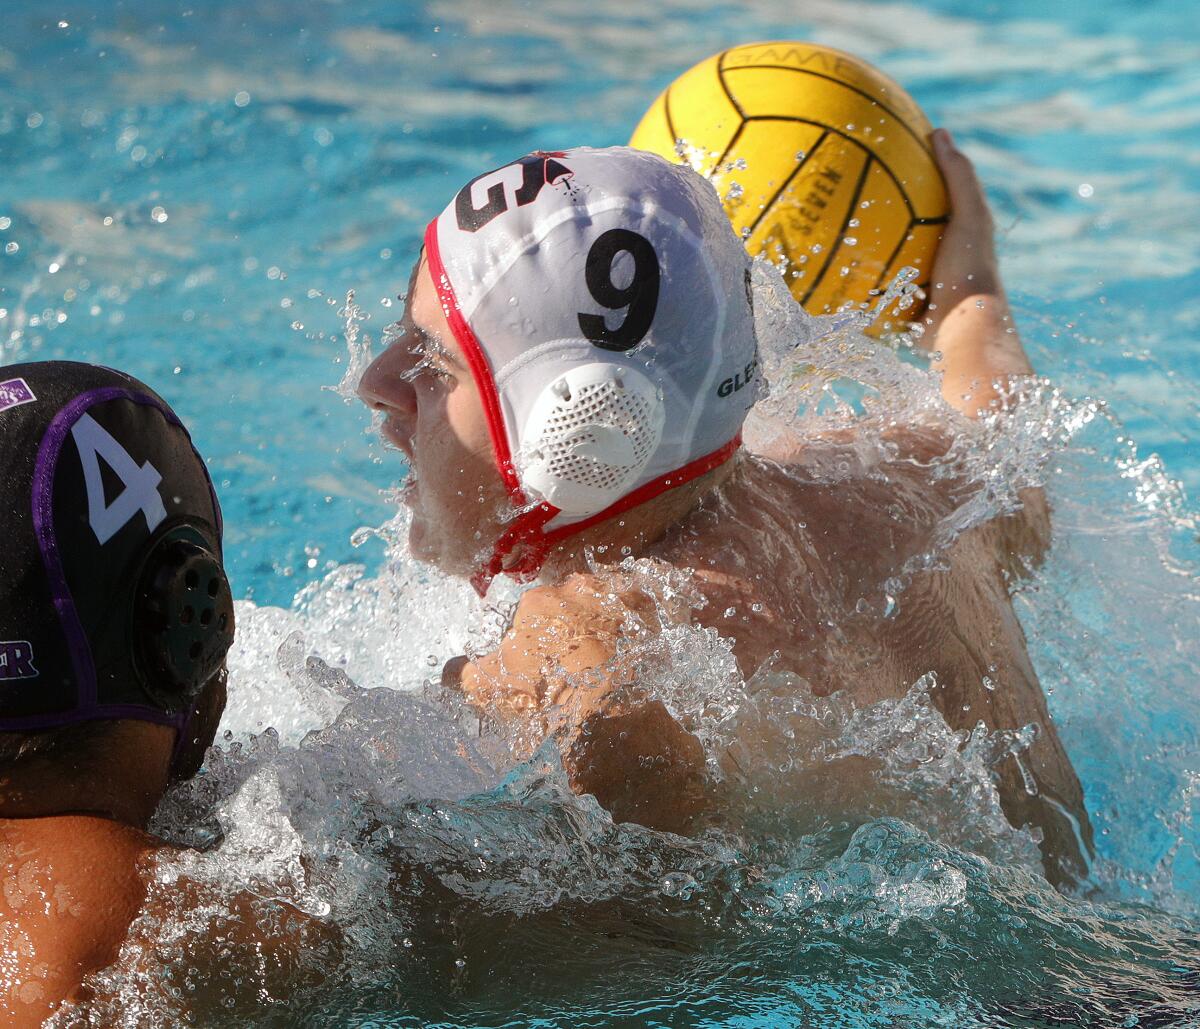 Glendale's Rudolf Hovhannisyan aggressively turns to shoot on Hoover's Hayk Nazaryan but not score in a Pacific League boys' water polo match at Hoover High School on Wednesday, October 23, 2019. Hoover defeated Glendale 12-11 after coming from behind in the fourth quarter to win the match.